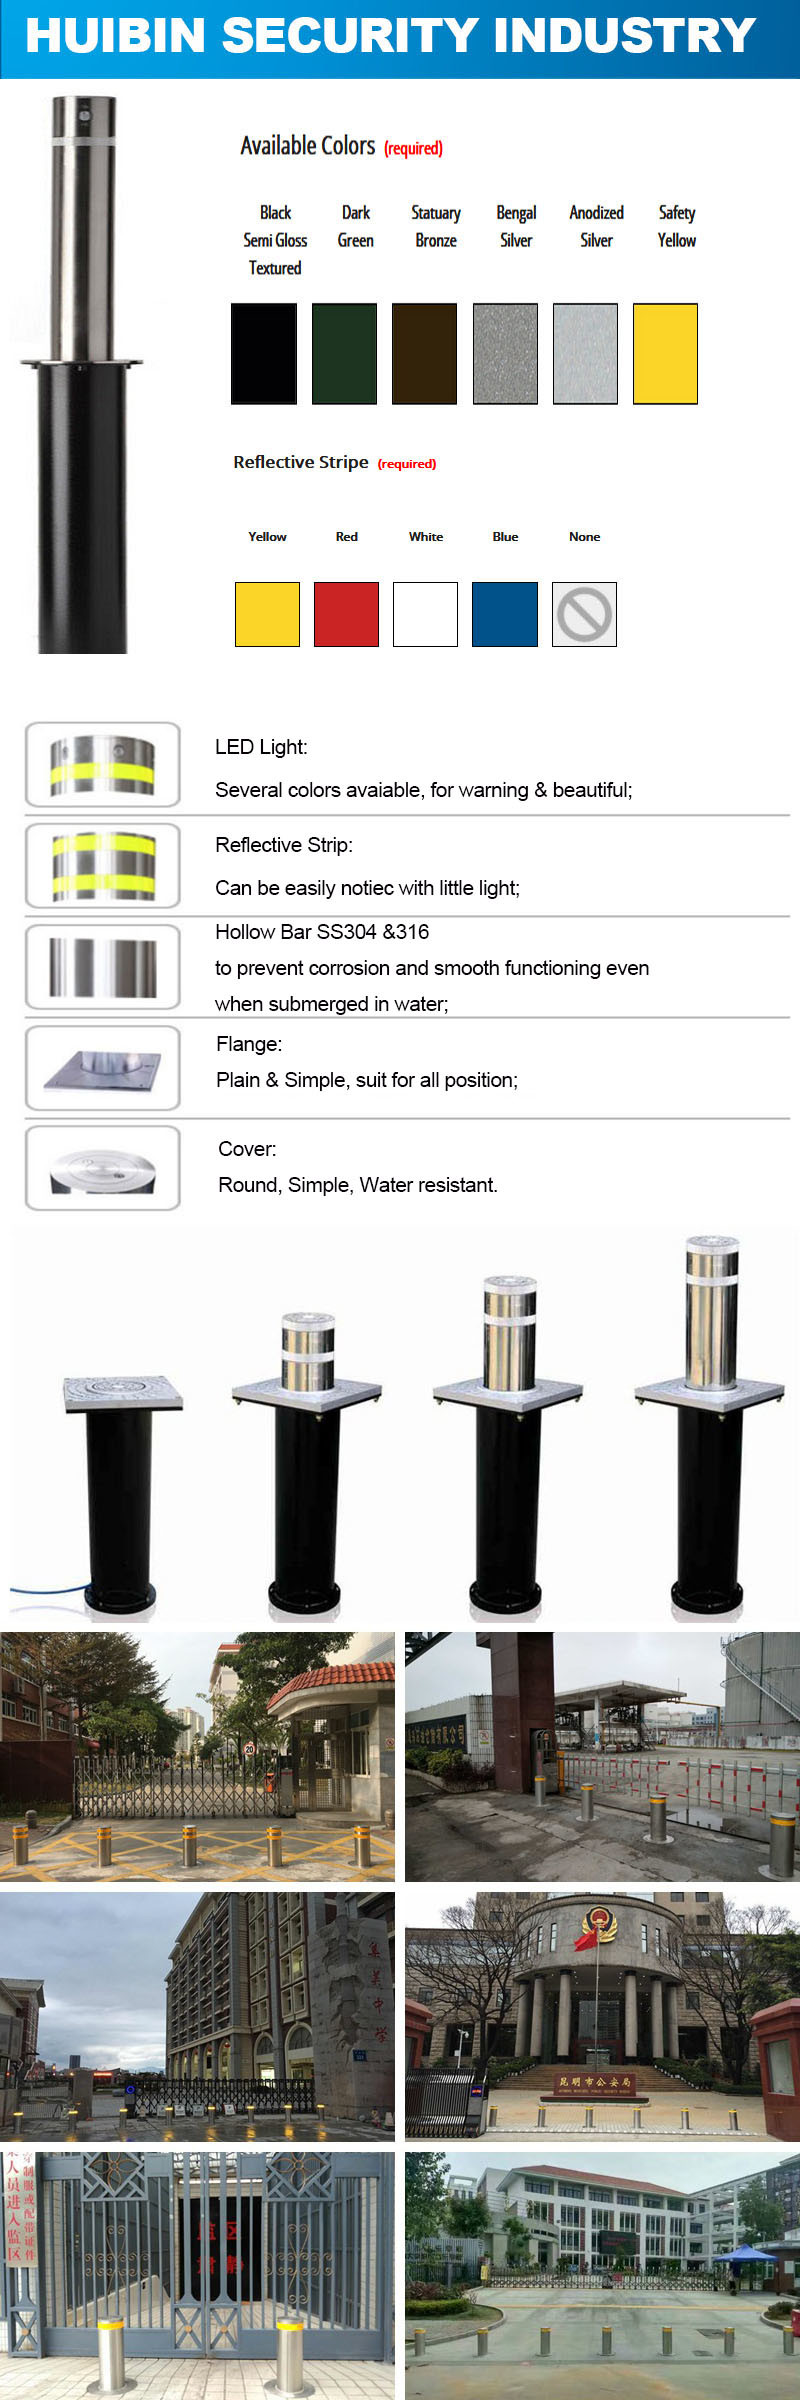 Parking System Automatic Stainless Steel Barrier Bollard with Steel Covers